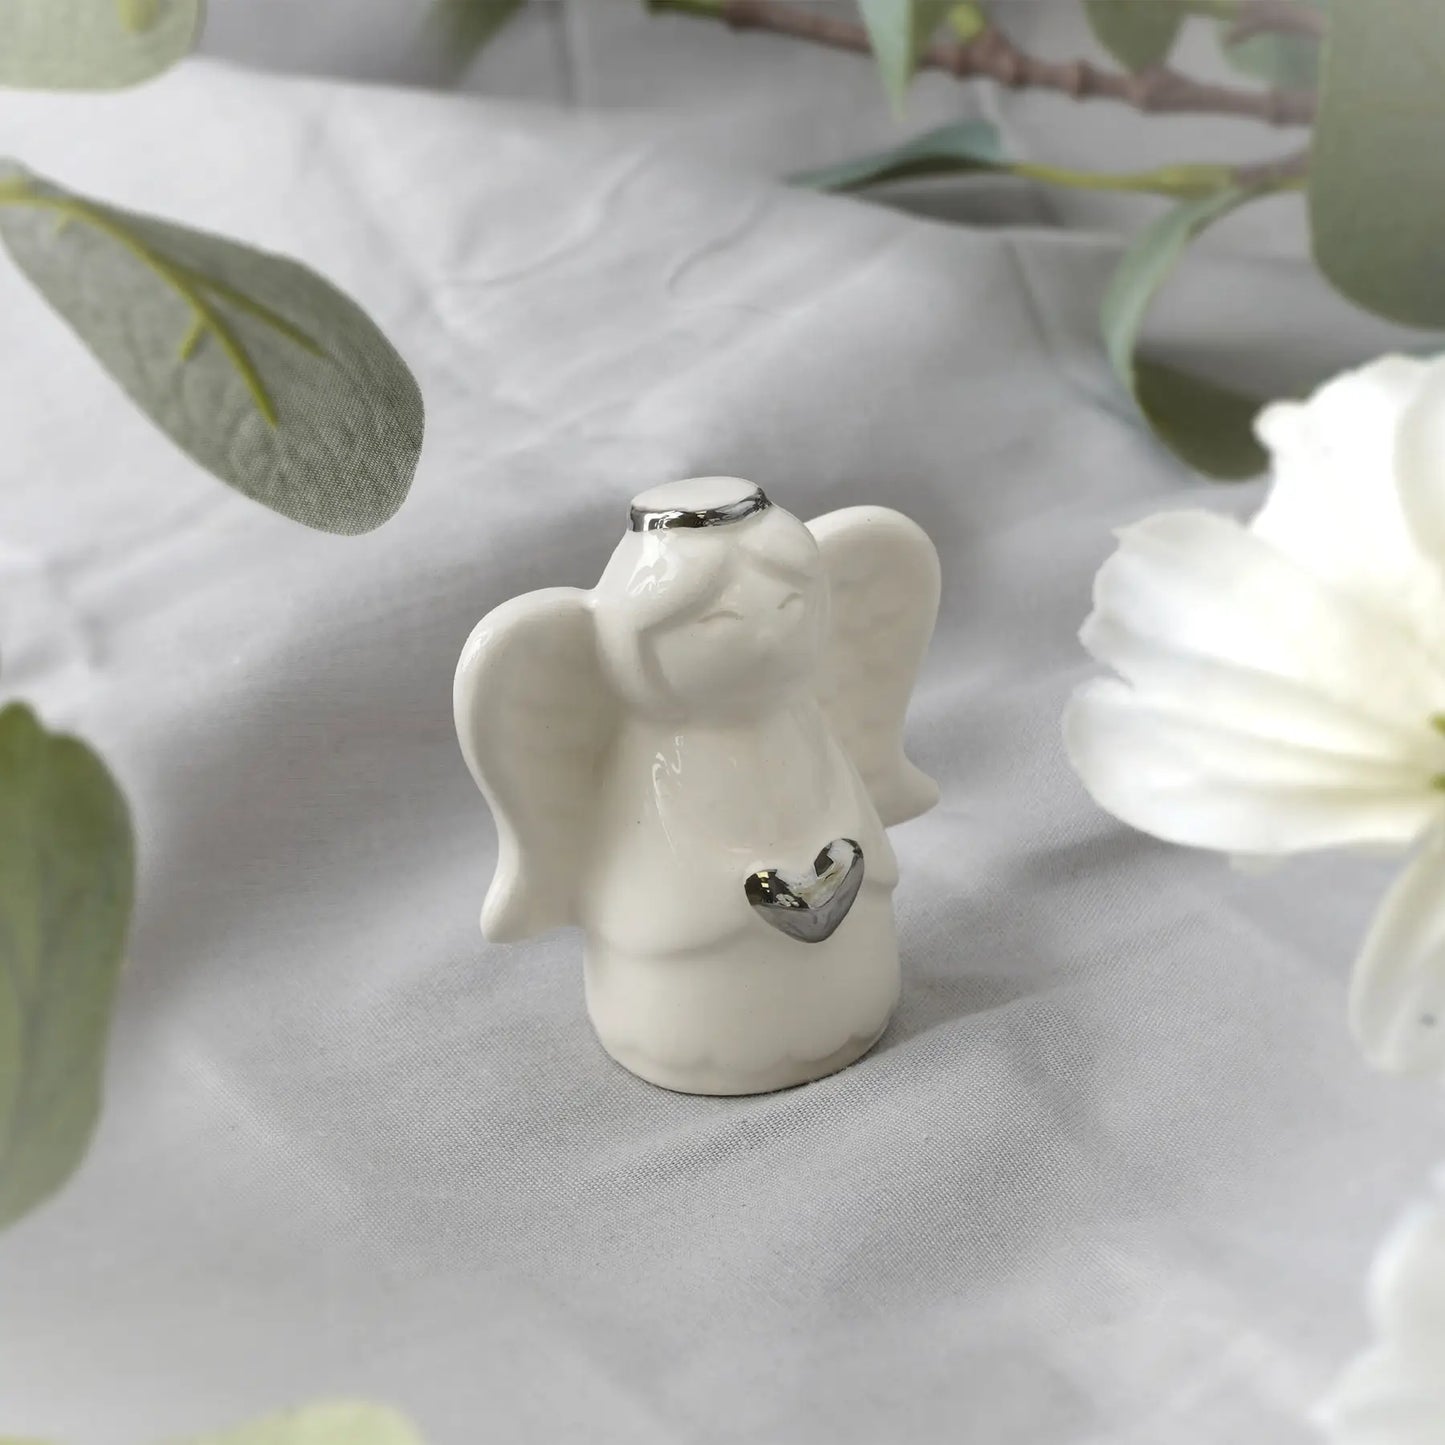 Ceramic white guardian angel ornament in a gift box